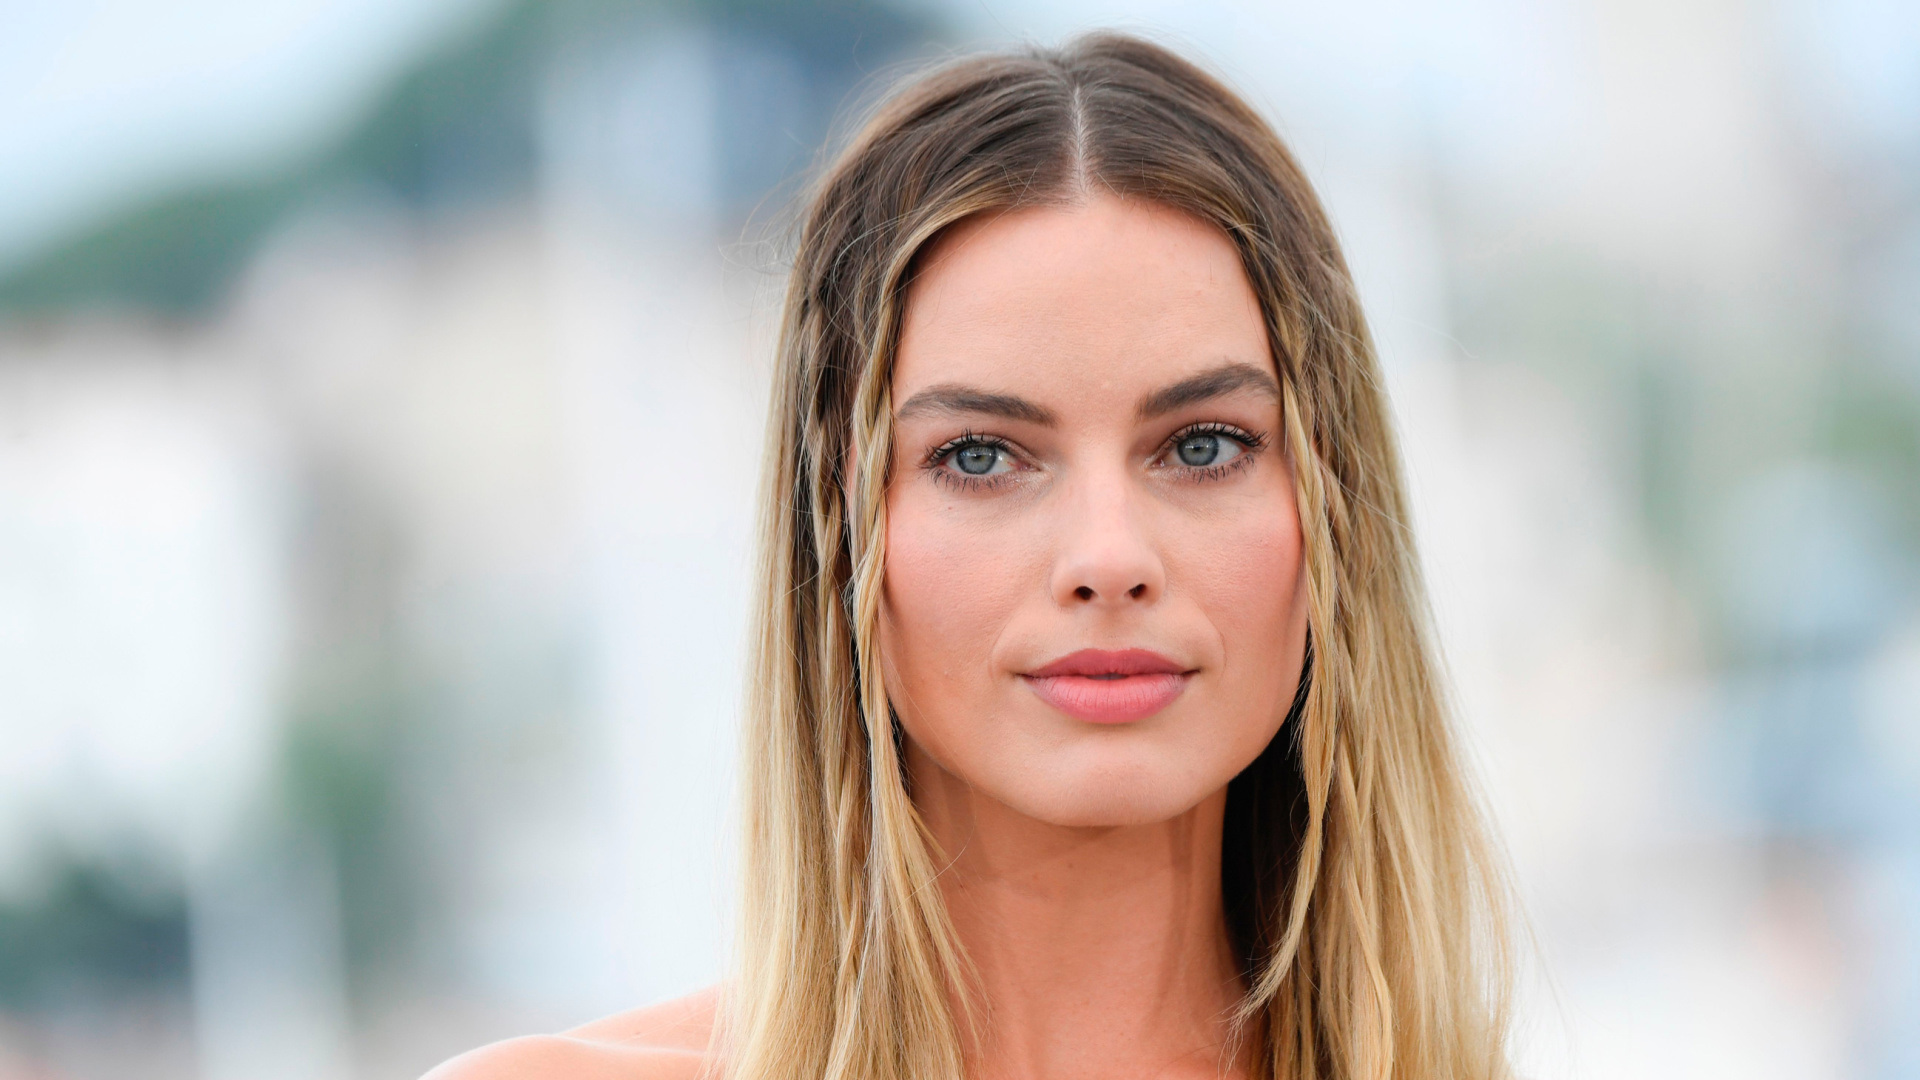 Margot Robbie Was Having the Best Time Ever at a Hockey Game With